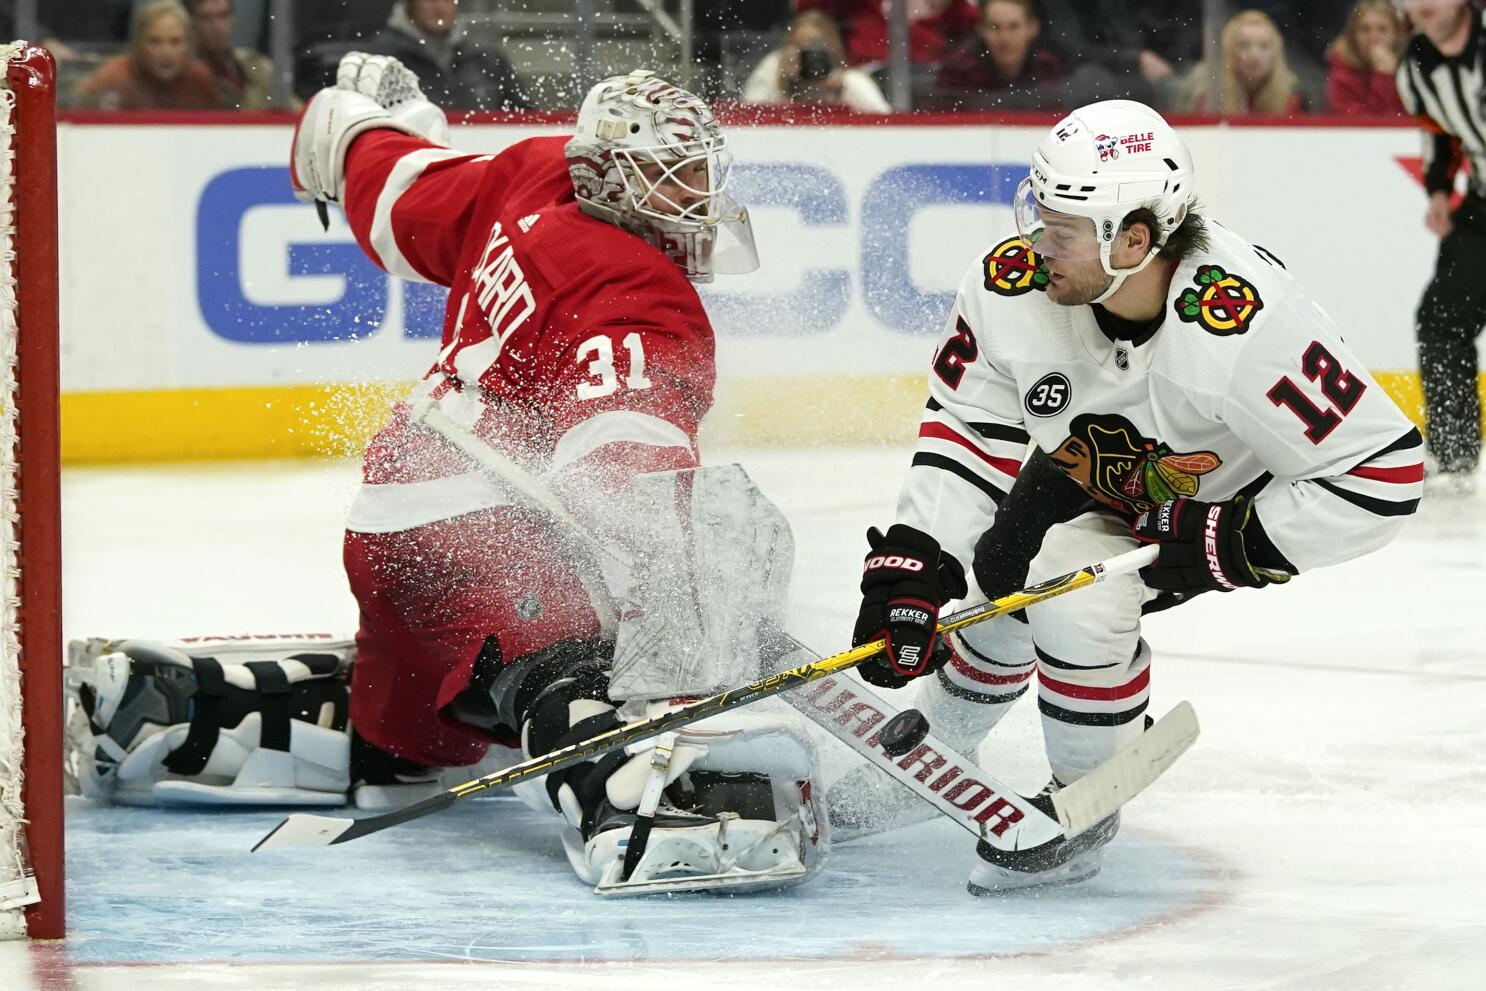 Strome has hat trick as Blackhawks outlast Red Wings 8-5 - ABC7 Chicago